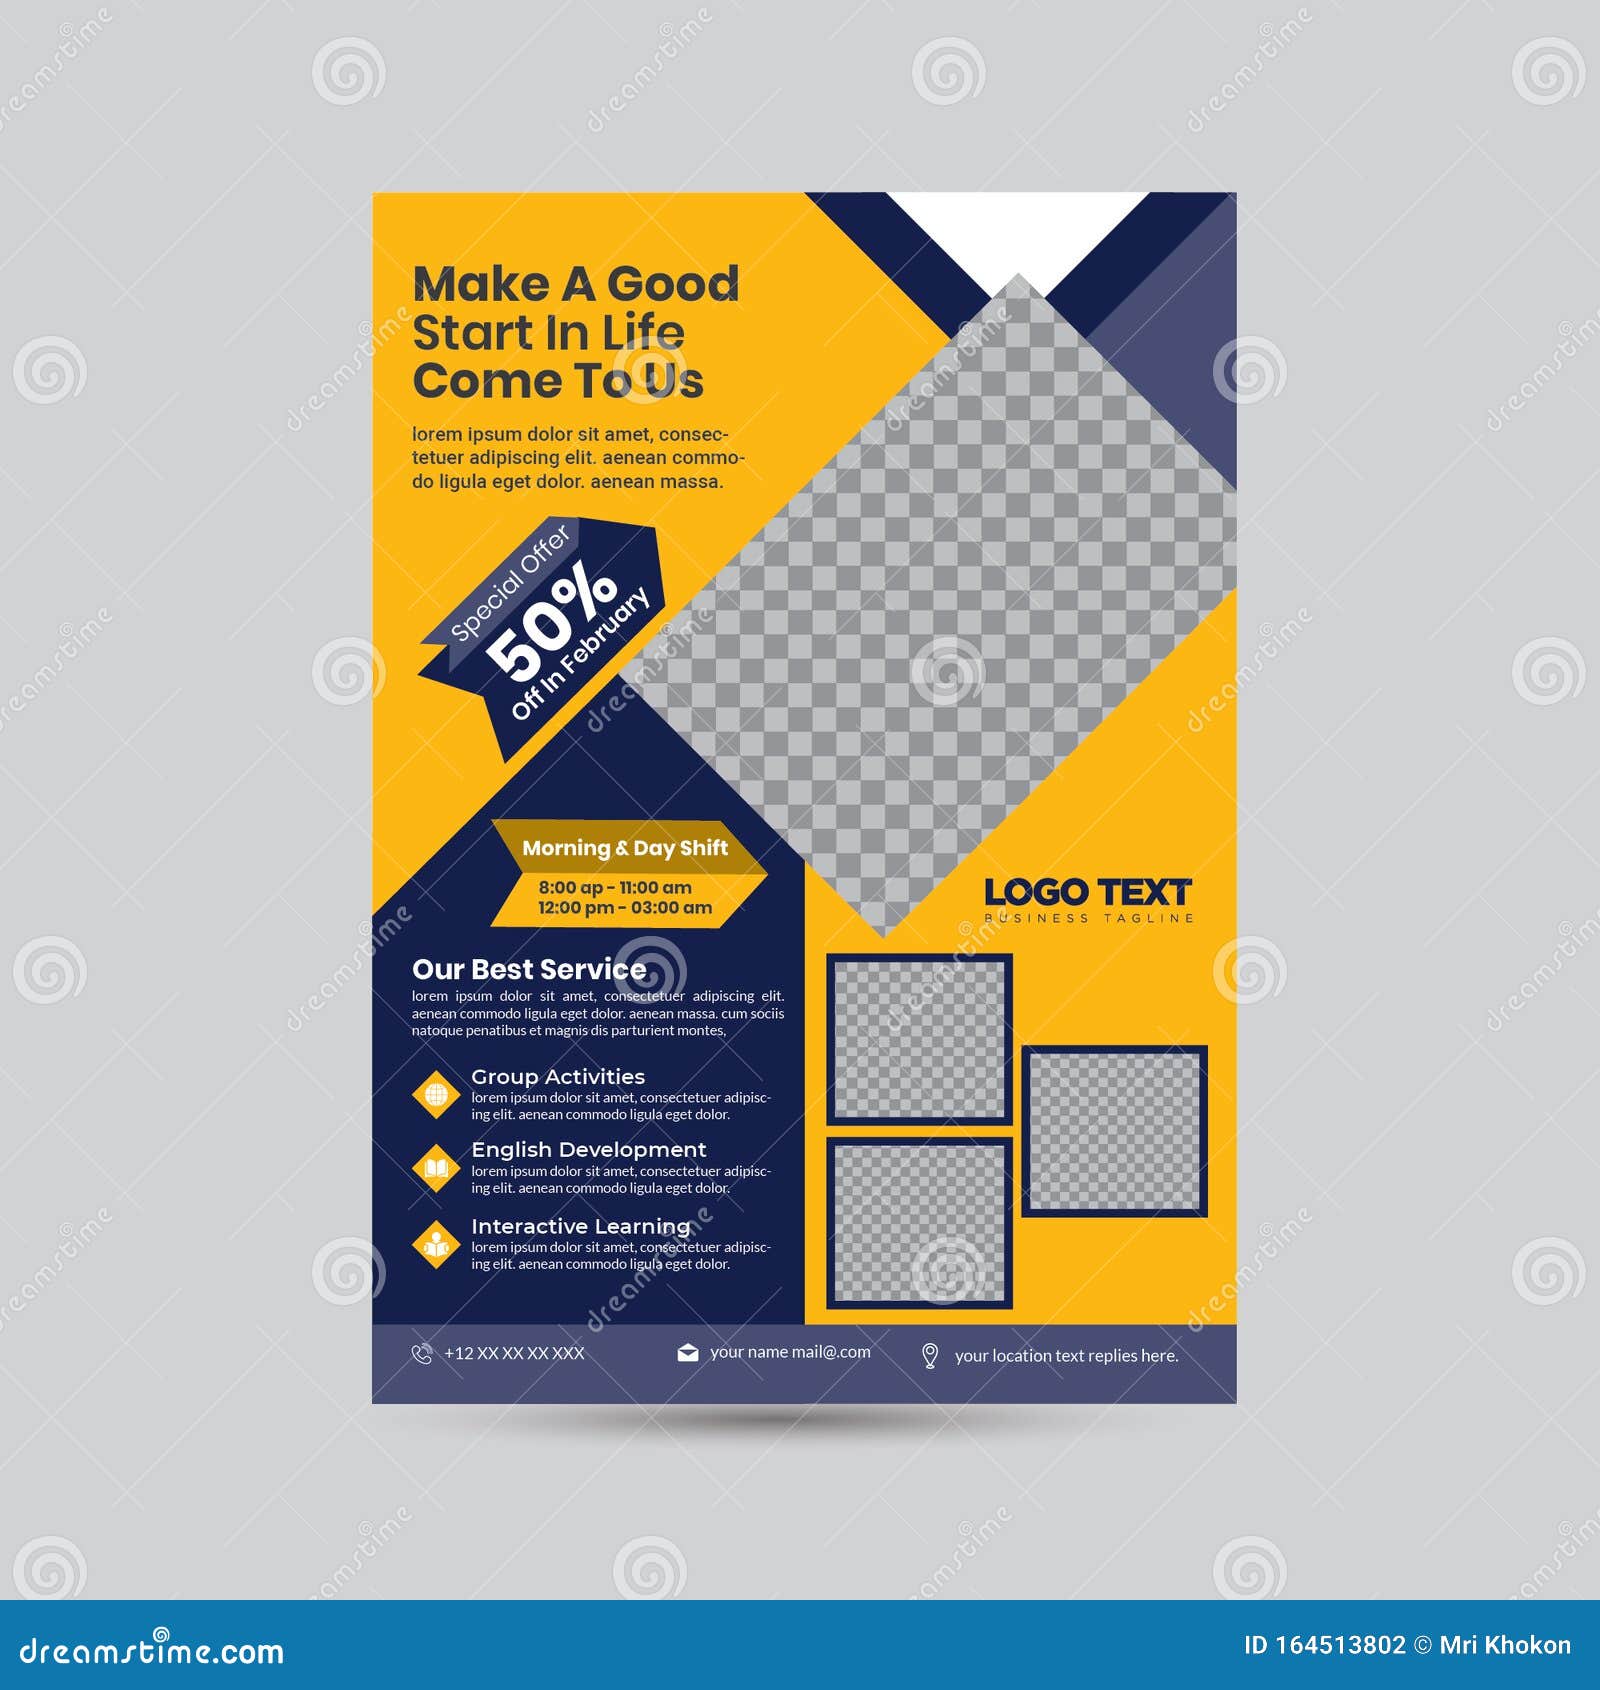 Education Flyer Vector Design Template Stock Illustration Within Create A Free Flyer Template